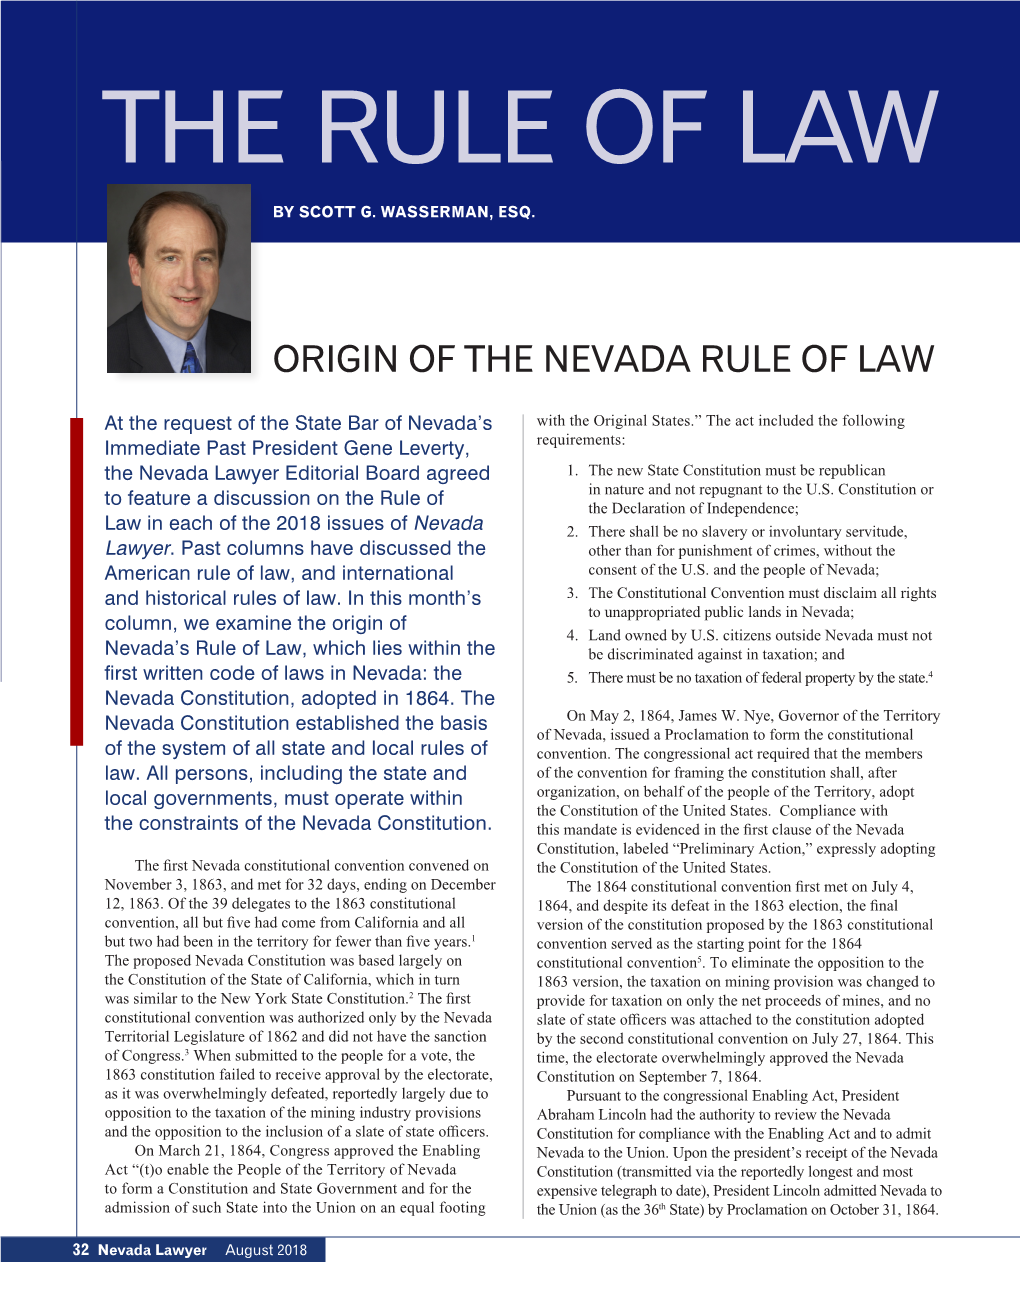 Origin of the Nevada Rule of Law